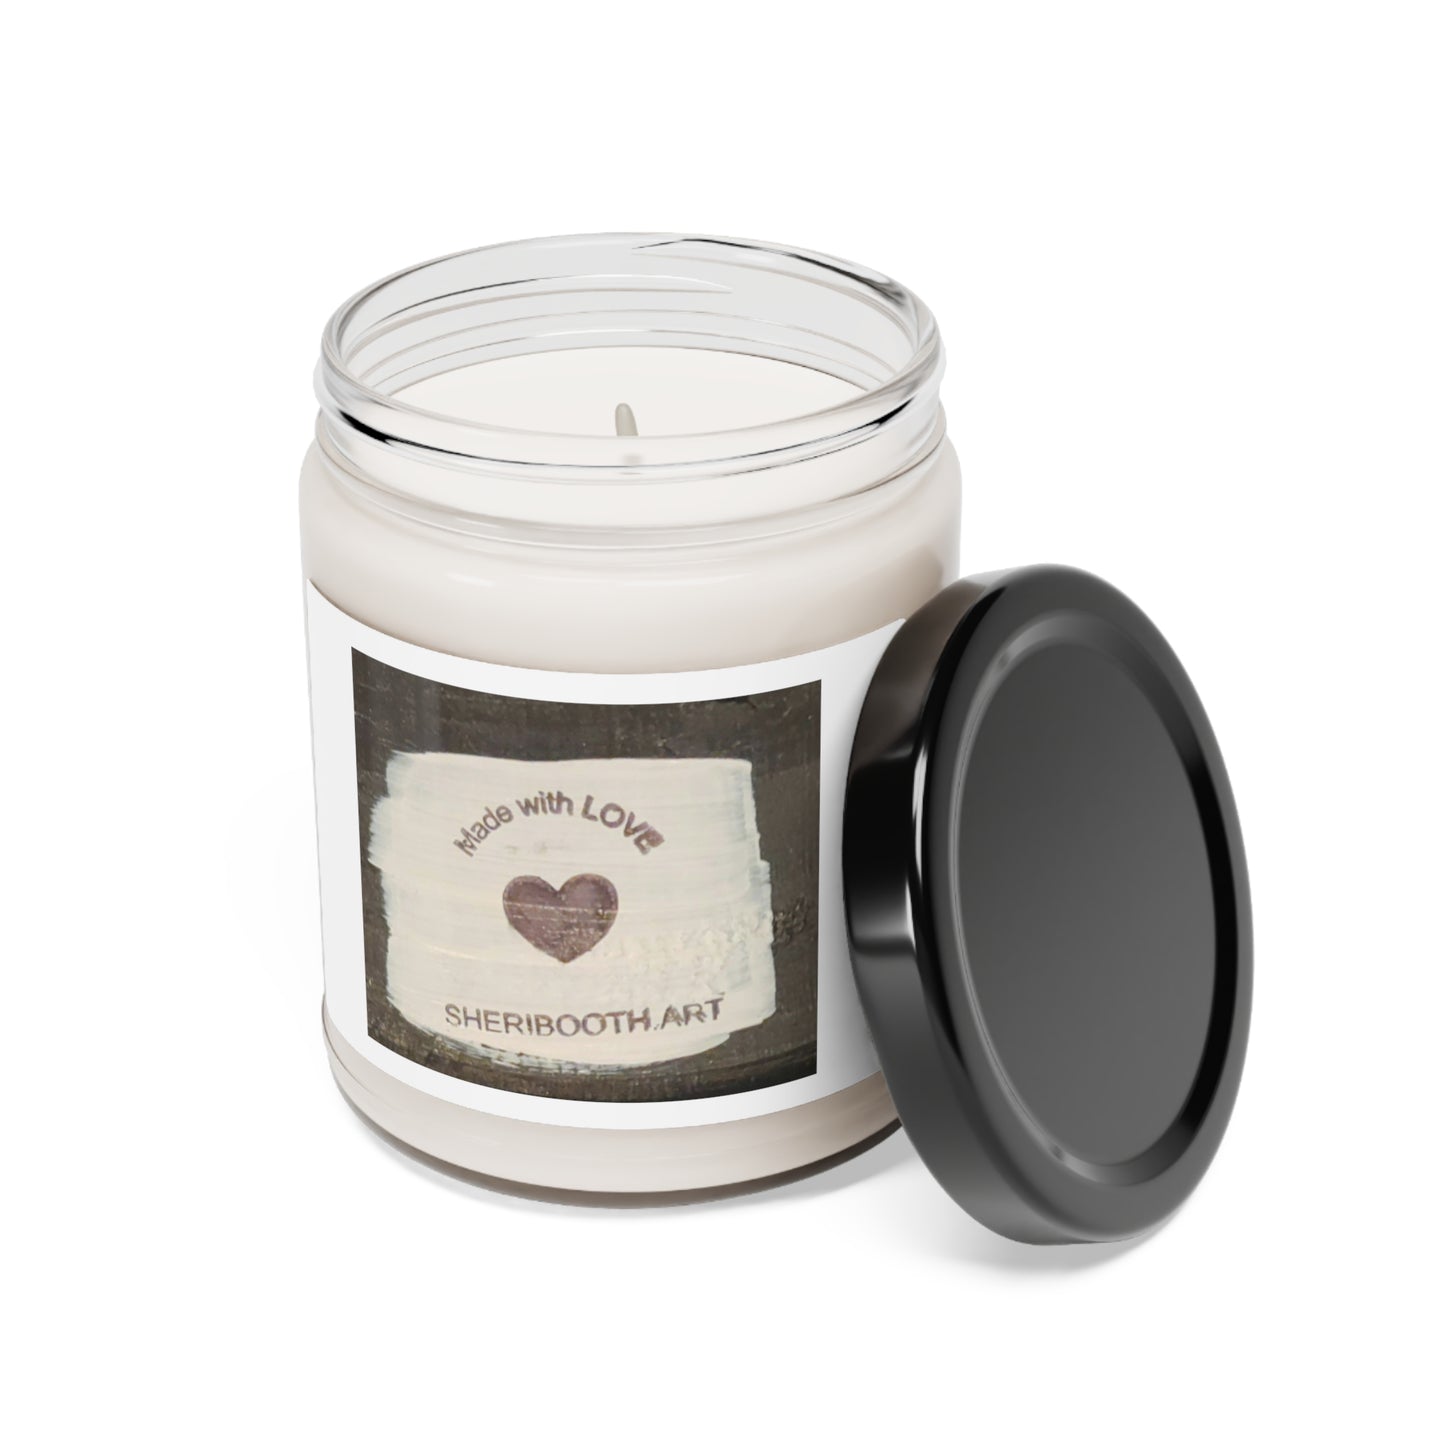 Made With Love Scented Soy Candle, 9oz